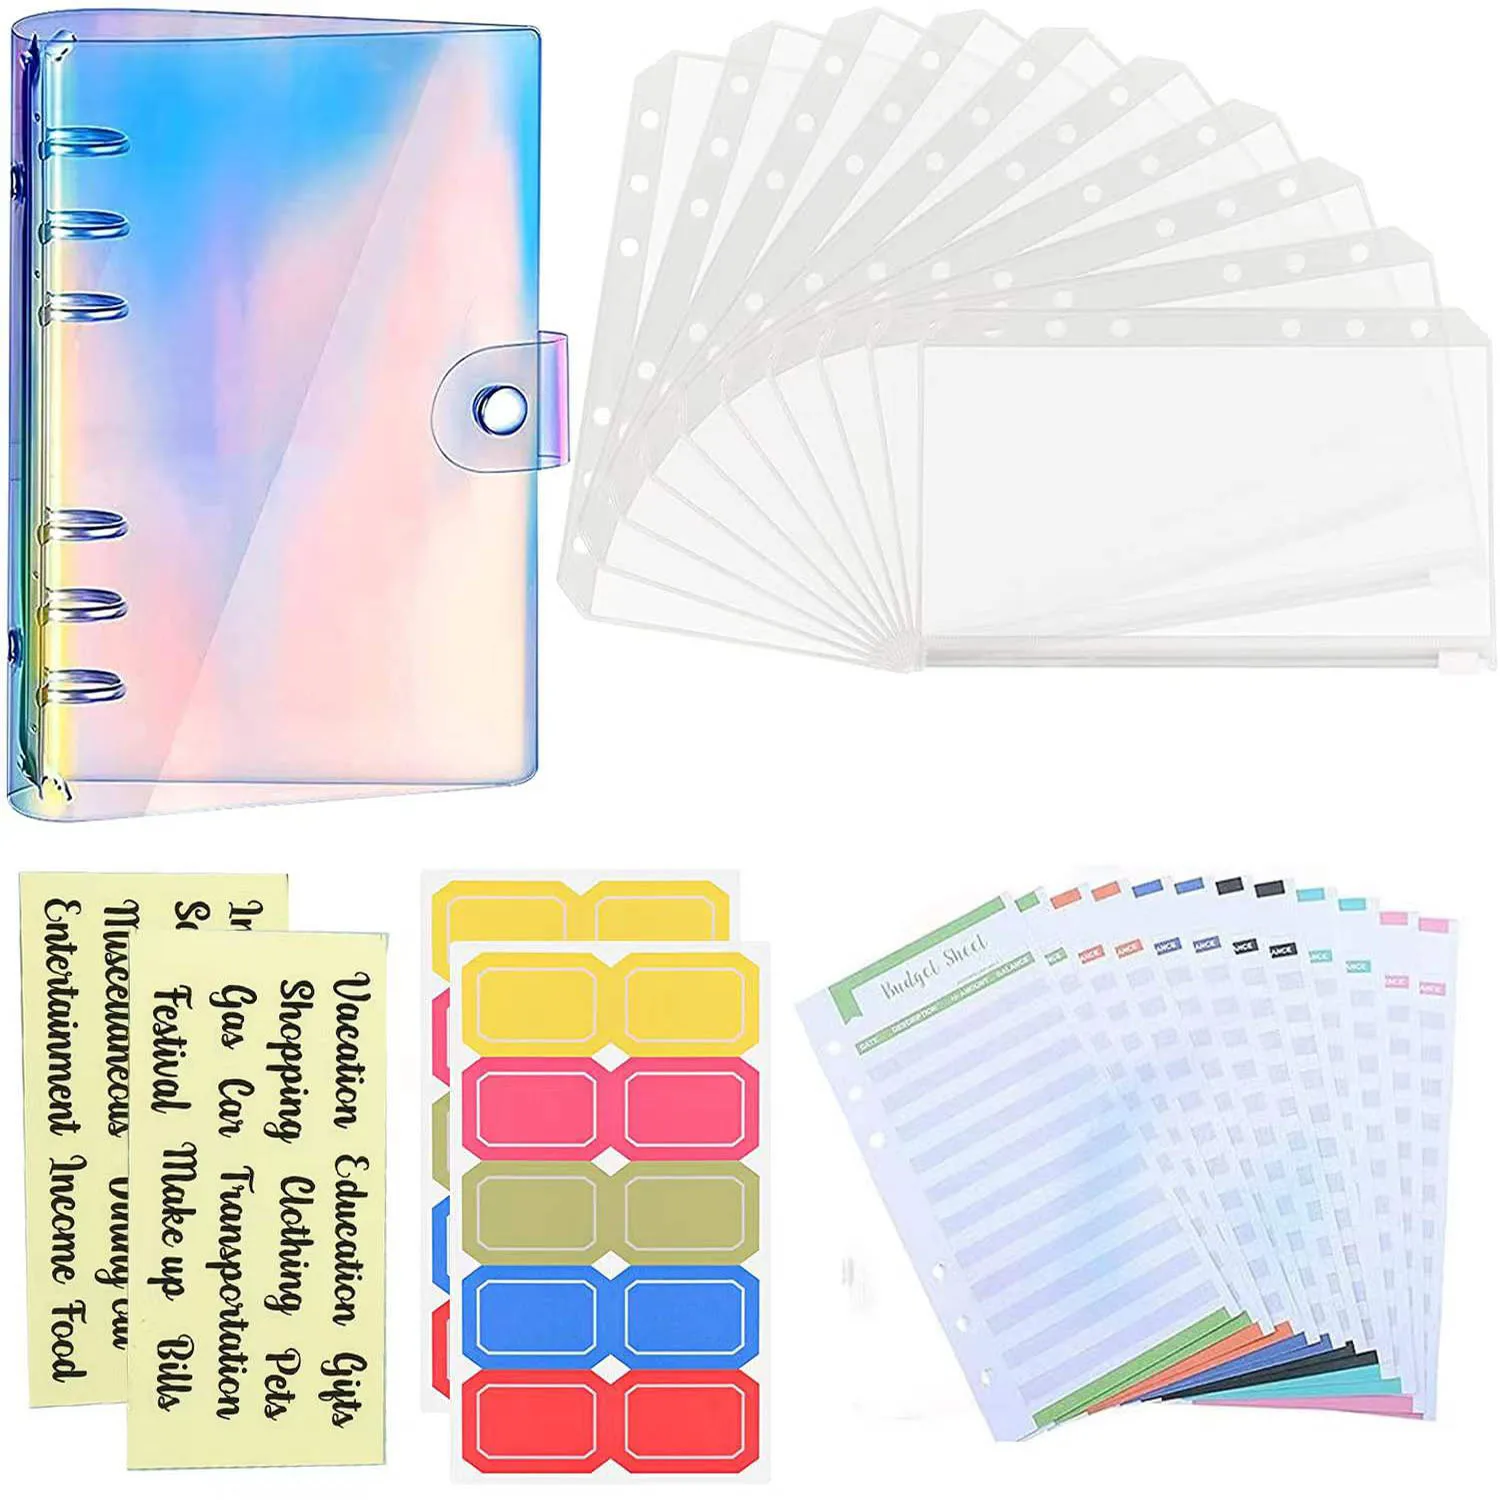 A6 Budget Binder Waterproof Cash Envelopes Notebook Organizer System with 10 Zipper Pockets,12 Budget Sheet and Label Stickers a6 budget binder with zipper envelopes notebook cover cash envelopes budget planner organizer for a6 binder notebook journal